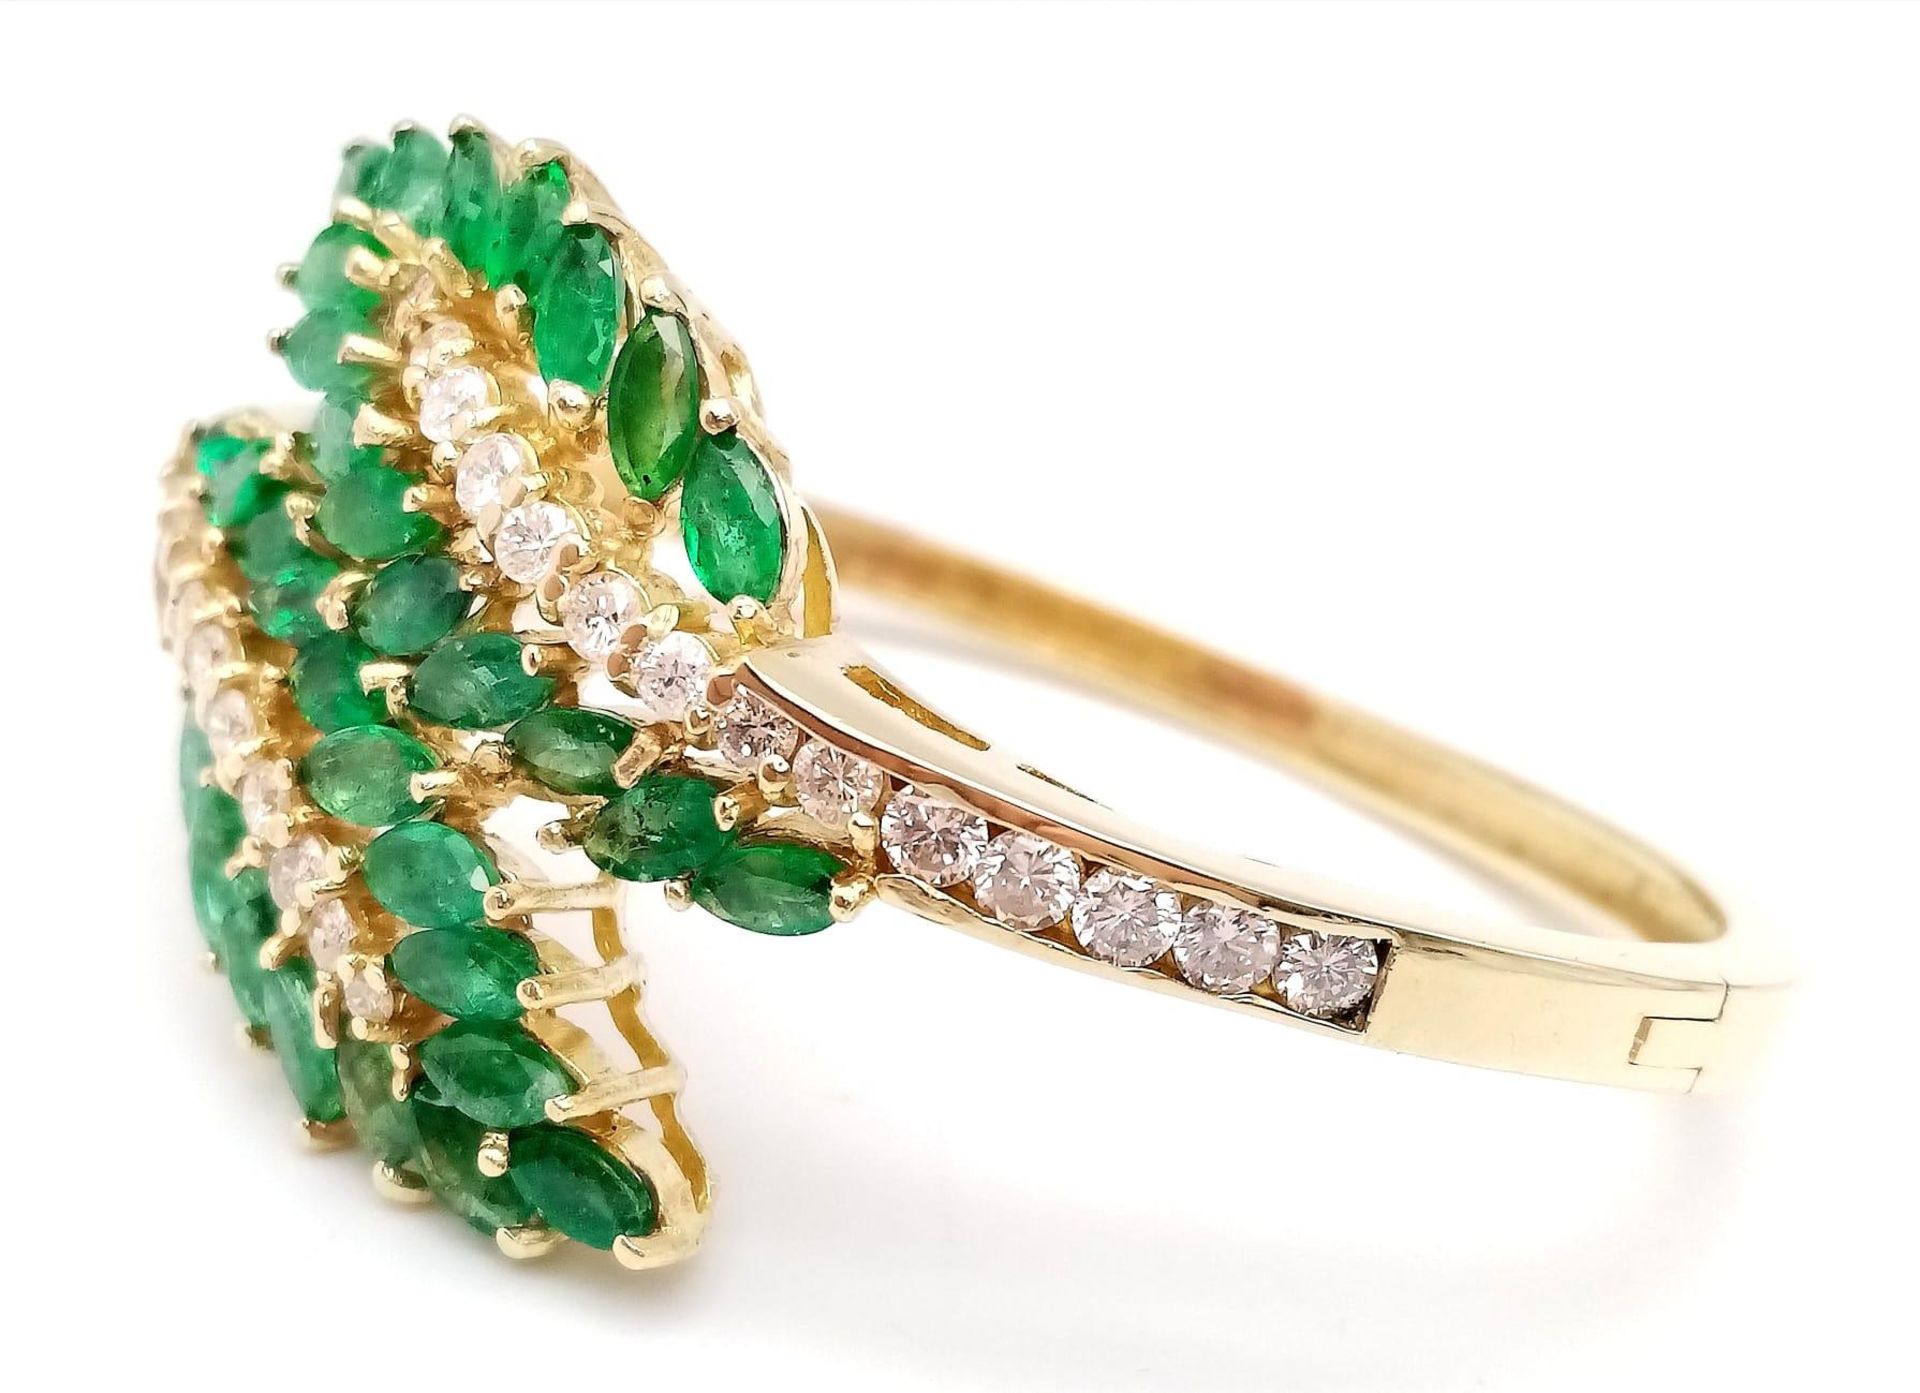 A DIAMOND AND EMERALD LEAF DESIGN BANGLE IN CROSSOVER STYLE SET IN18K GOLD . 33.5gms 10457 - Image 4 of 15